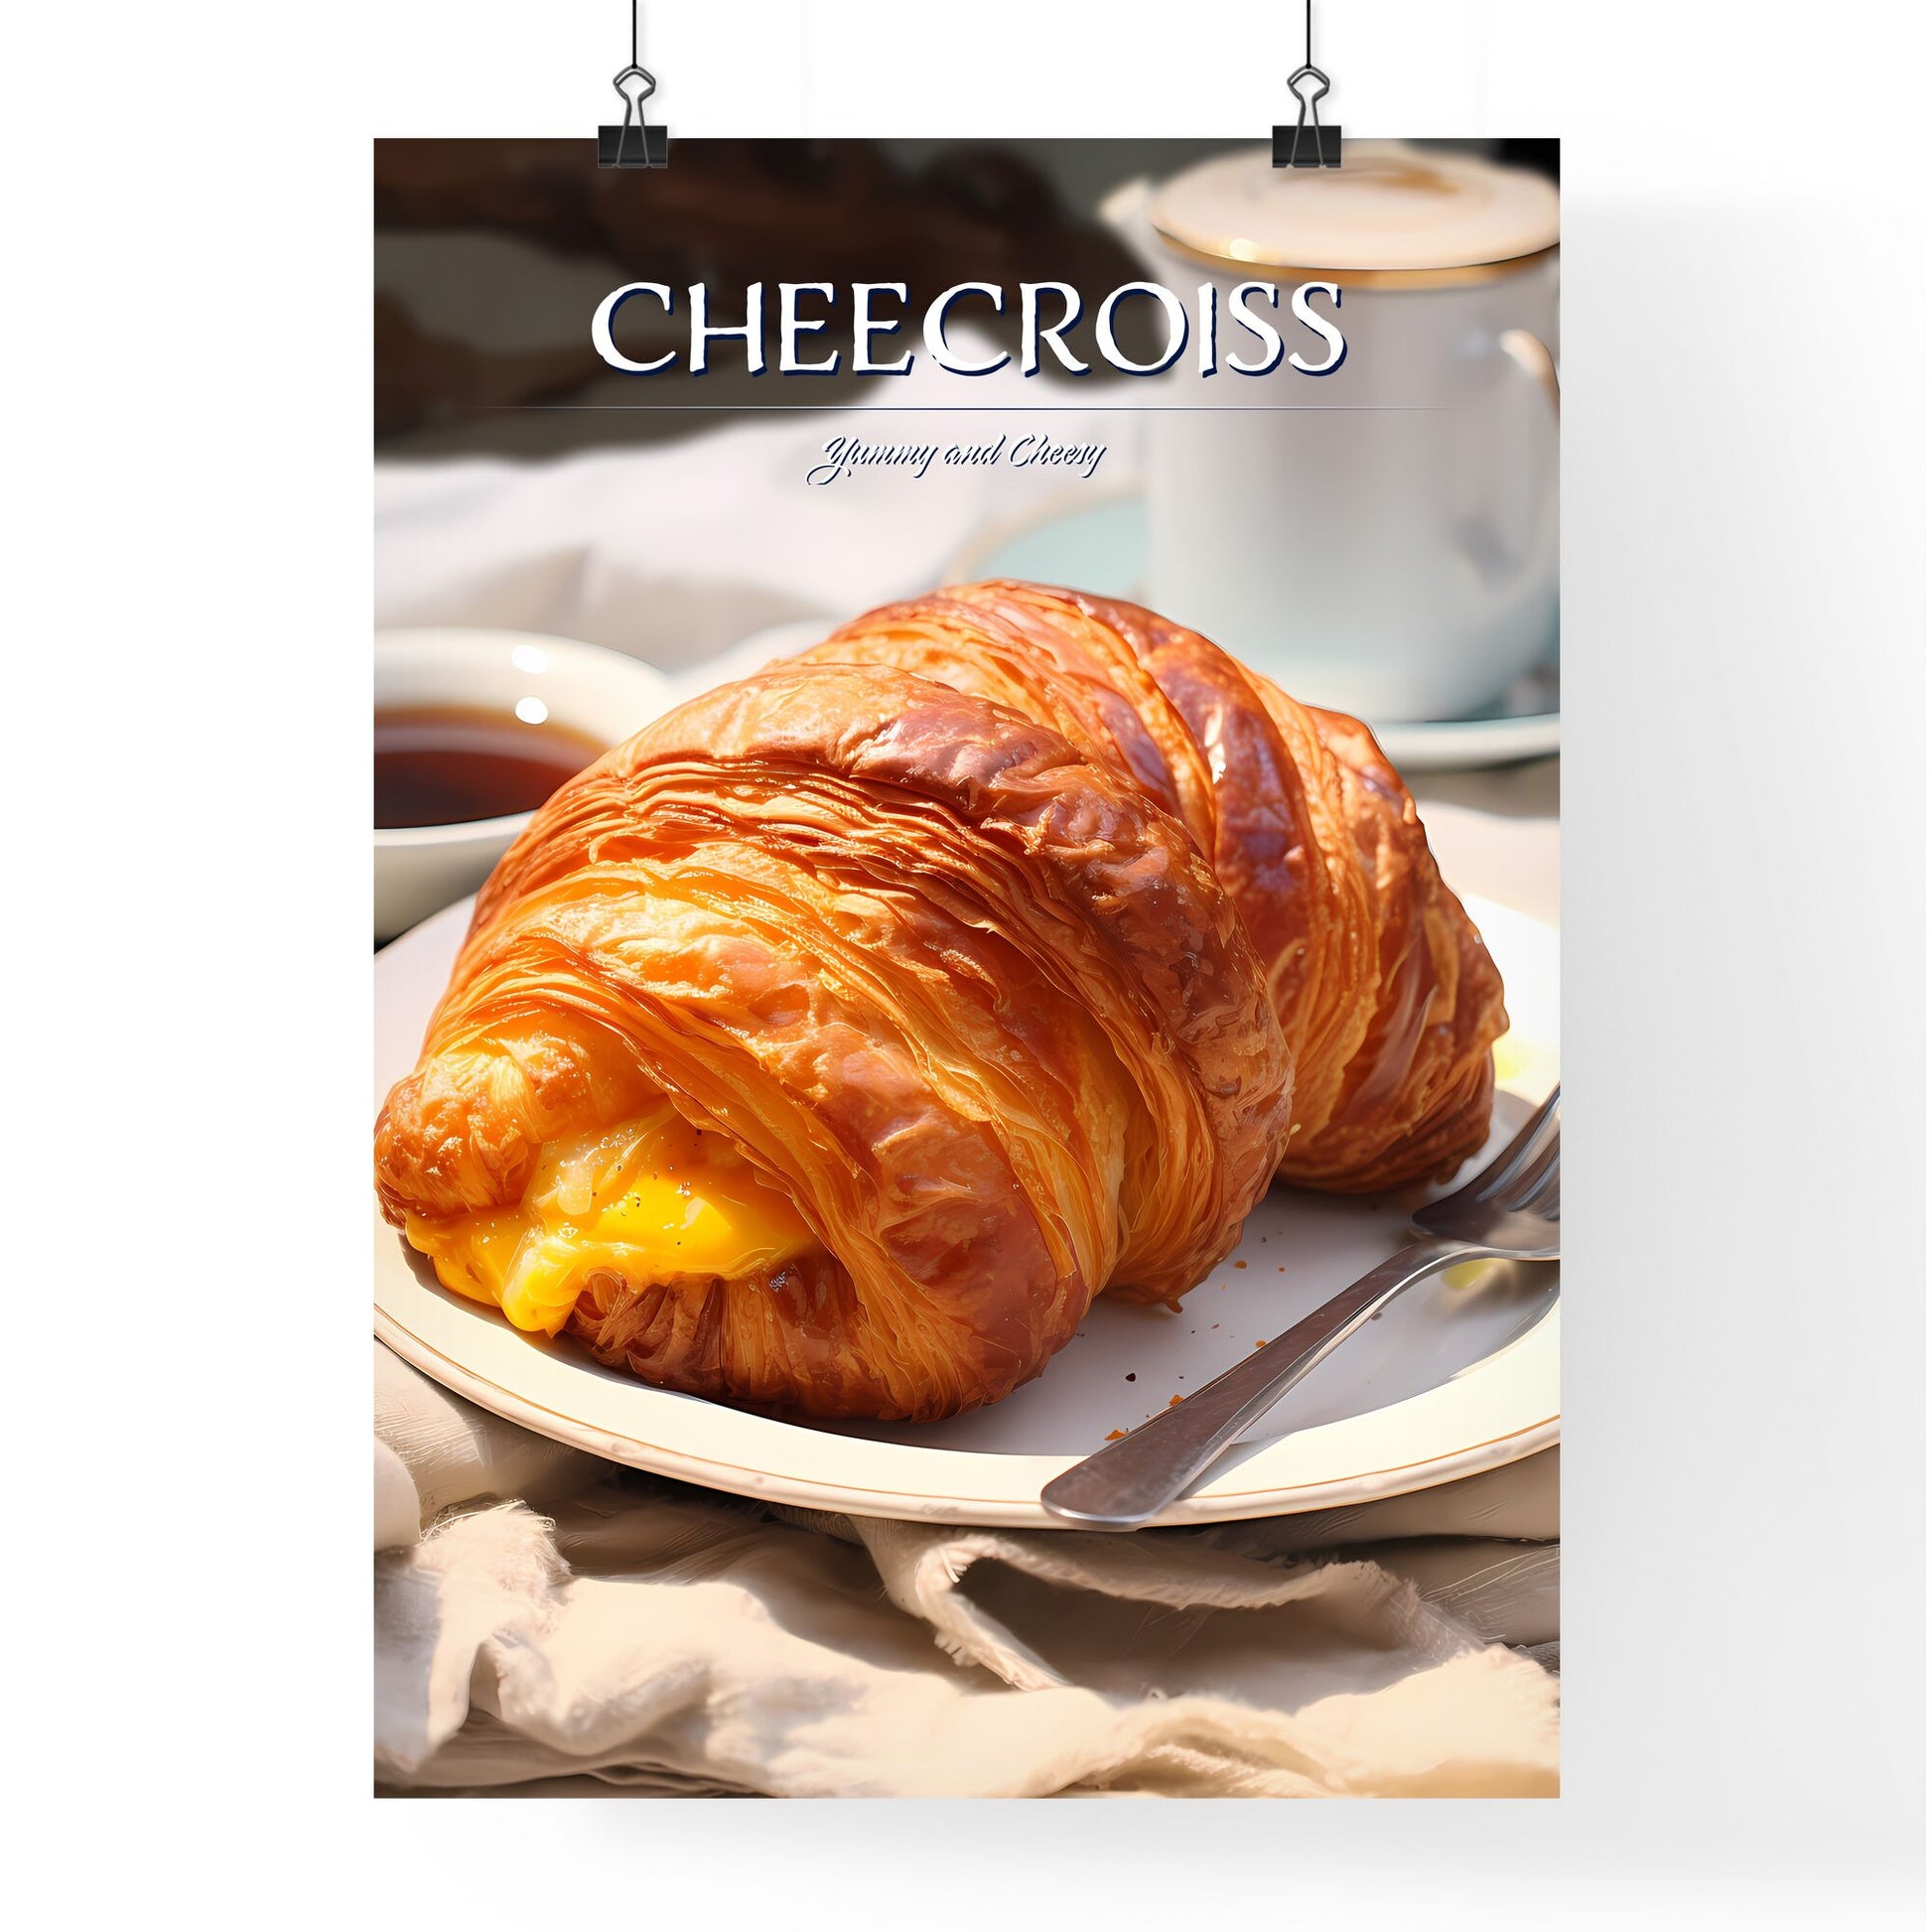 A Poster of Croissant - A Croissant With Cheese On A Plate Default Title